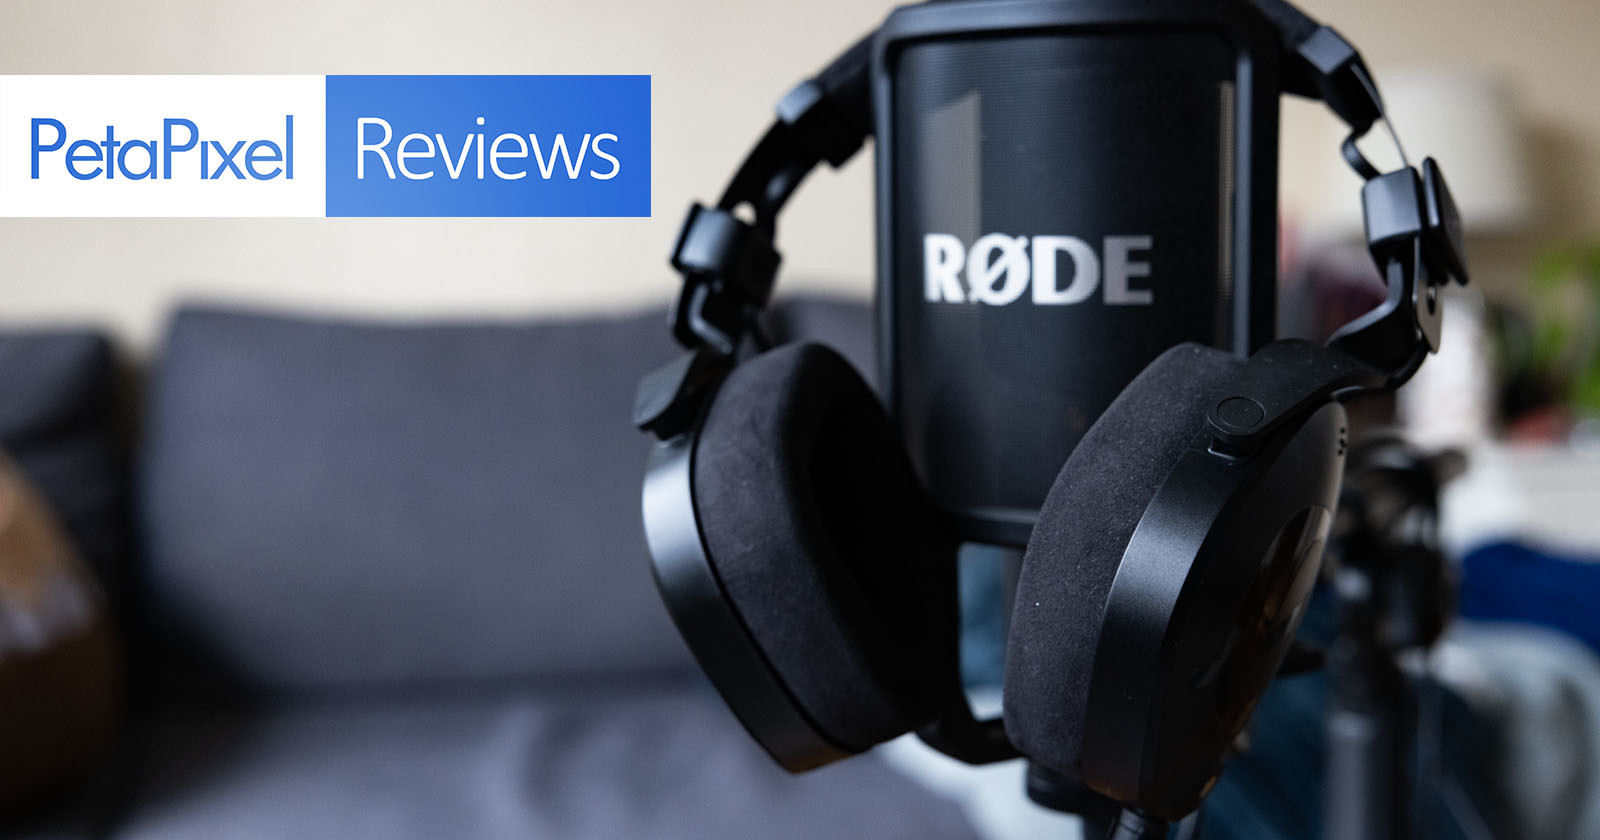 Rode NTH-100 Headphones Review: High-Quality with Warm Sound